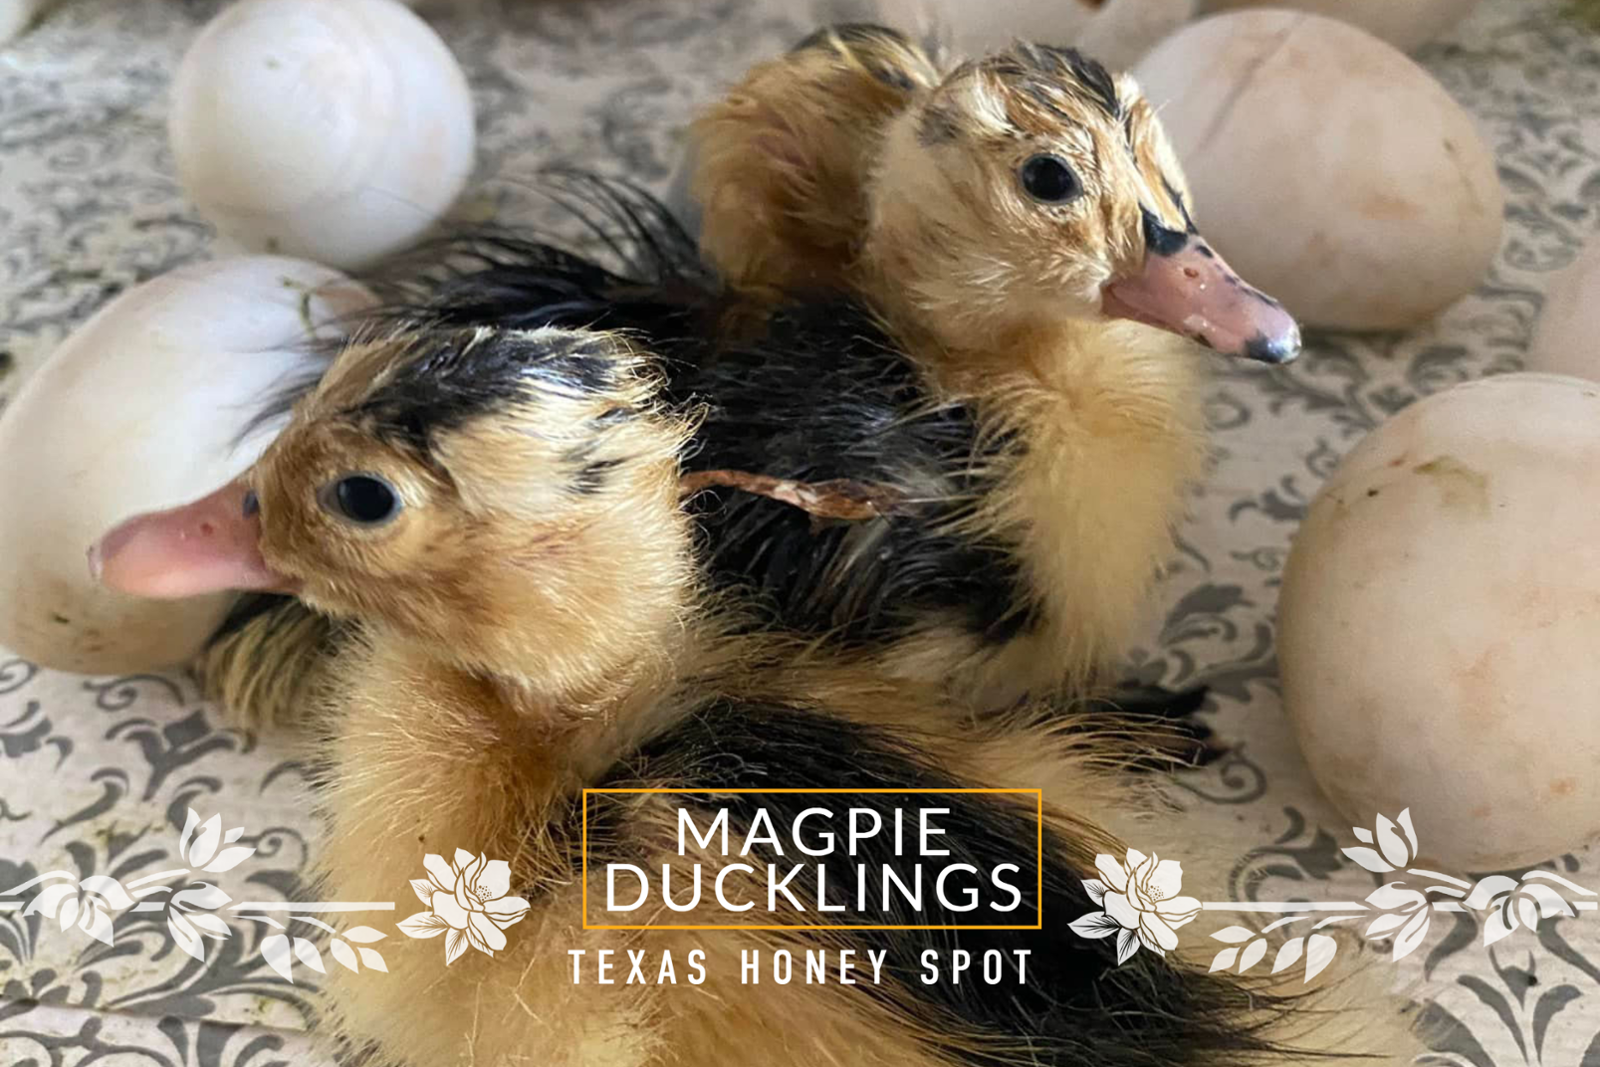 magpie ducklings hatching in incubator with other eggs behind